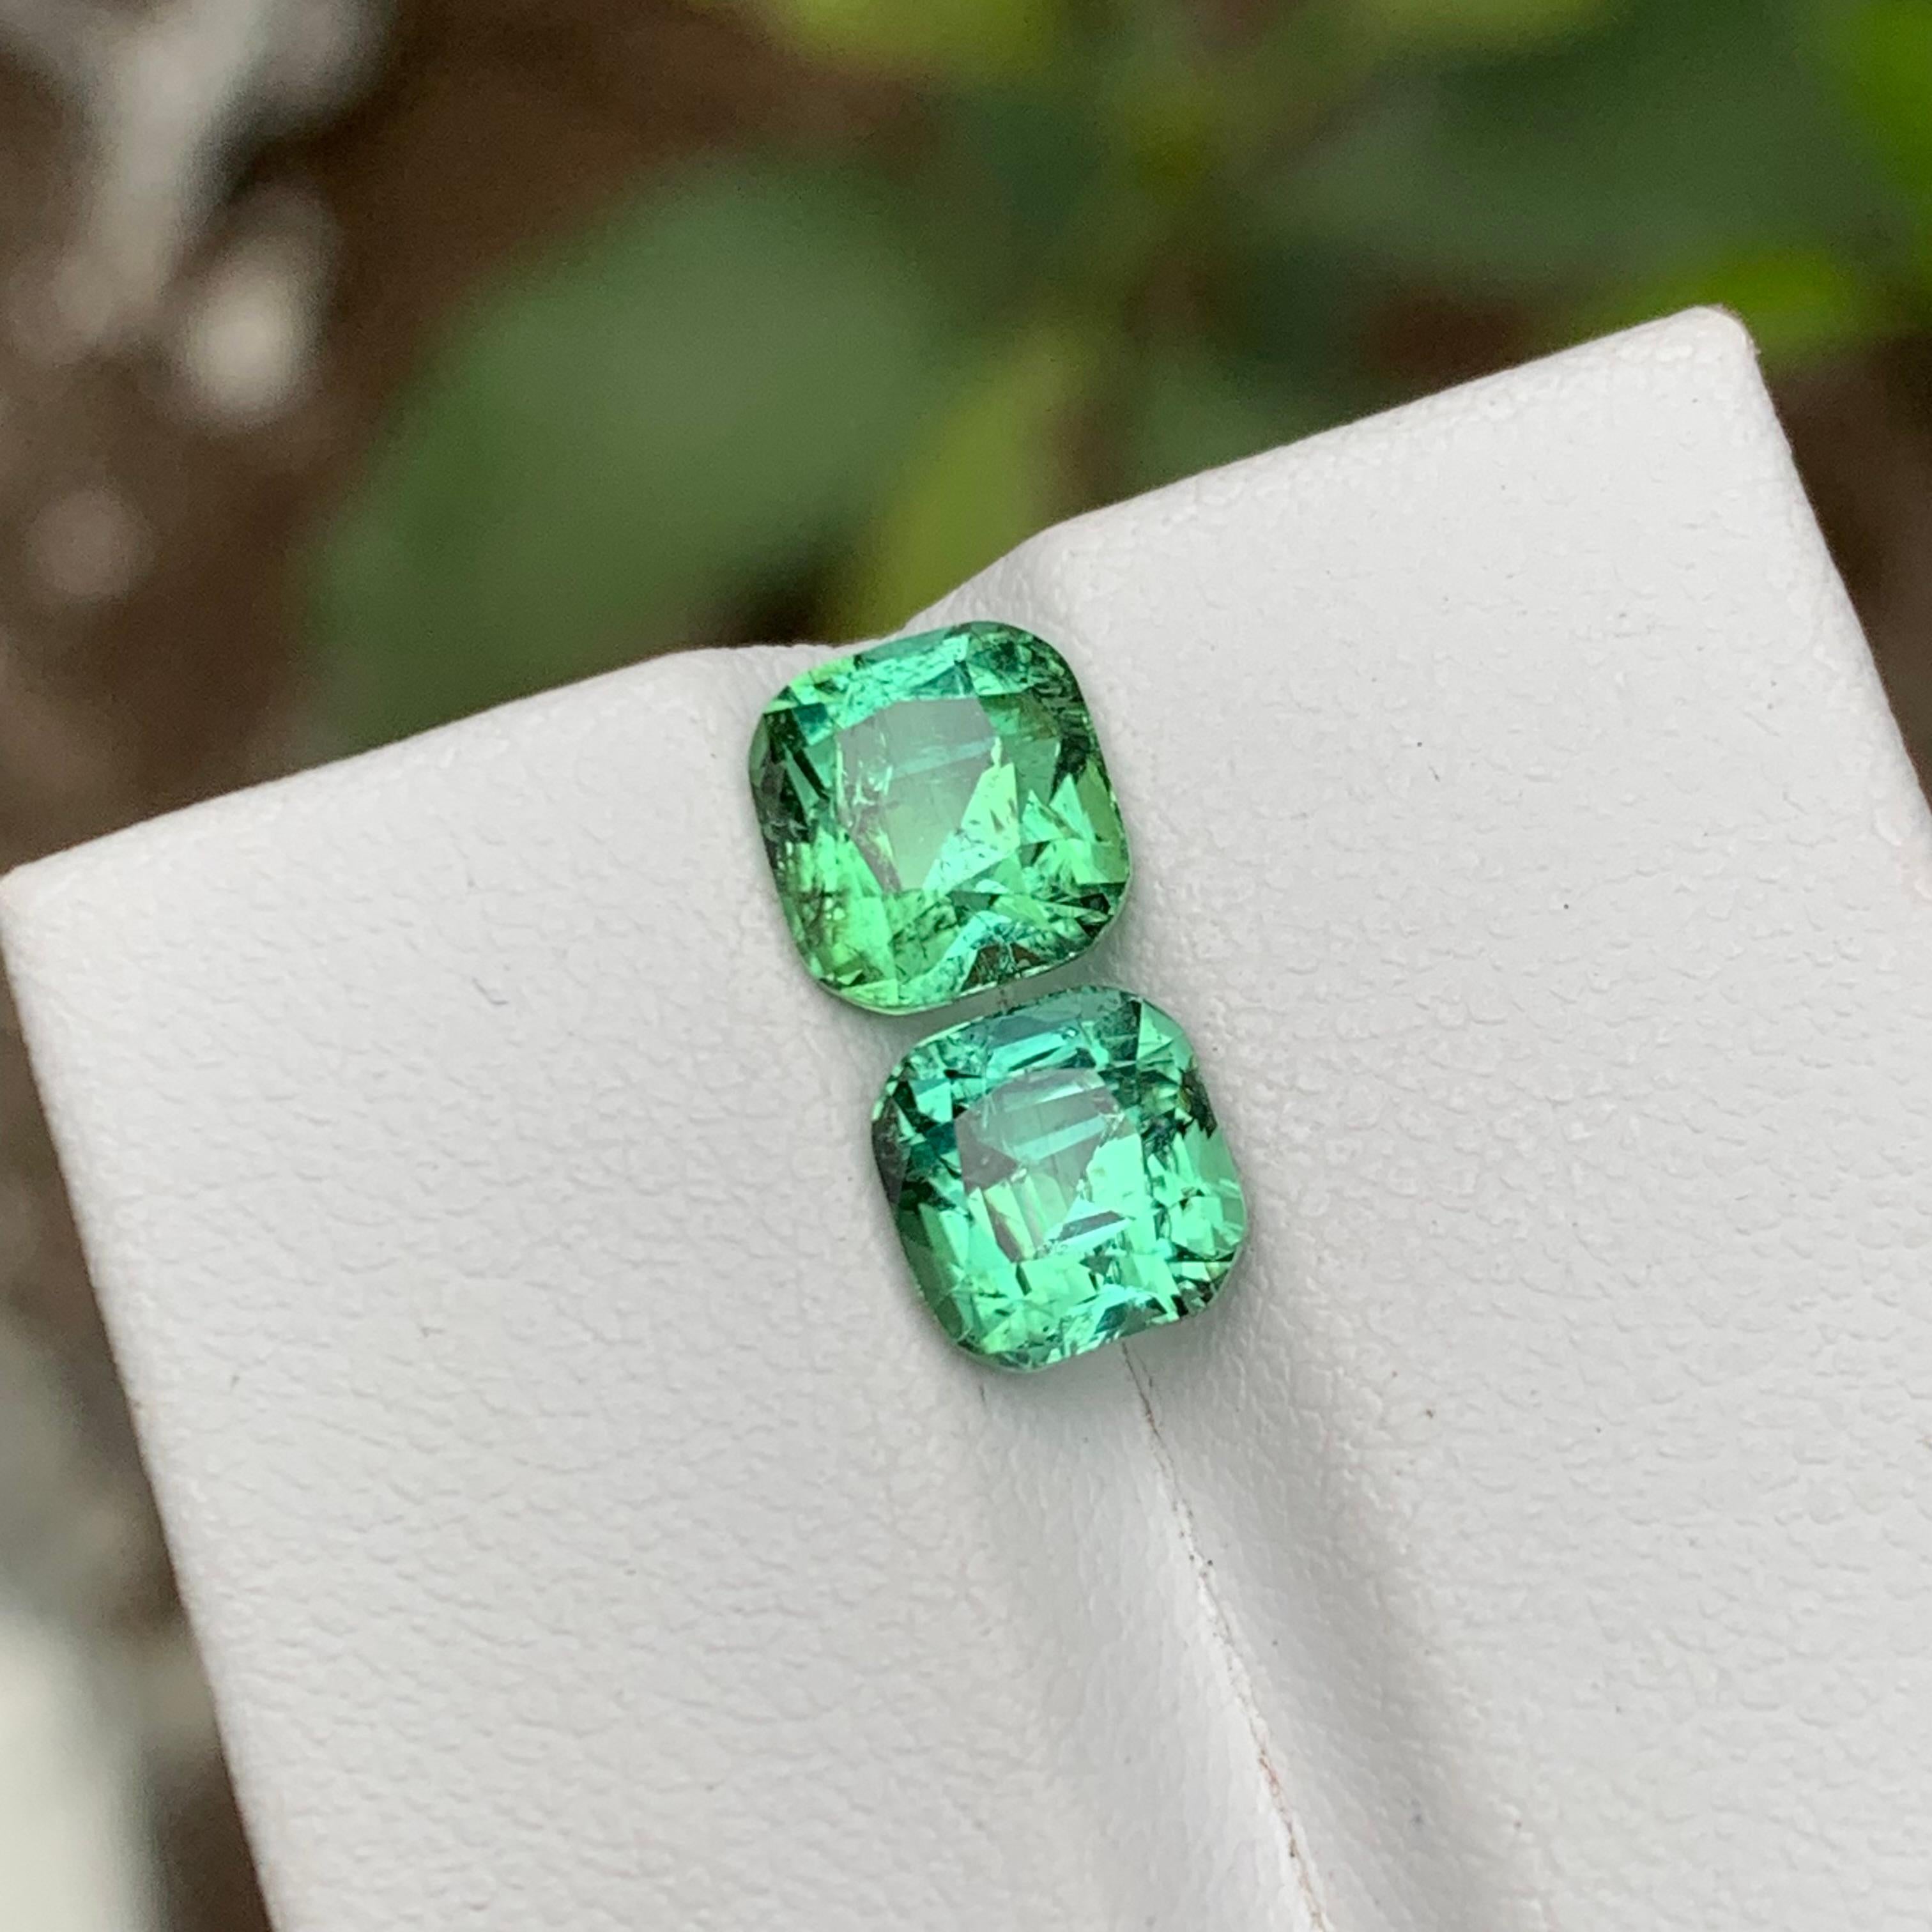 GEMSTONE TYPE: Tourmaline
PIECE(S): 2
WEIGHT: 3.75 Carats
SHAPE: Cushion 
SIZE (MM): 
1.95 Carat: 7.06 x 6.72 x 5.44
1.80 Carat: 6.62 x 6.35 x 5.71
COLOR: Mint Green
CLARITY: Slightly Included 
TREATMENT: None
ORIGIN: Afghanistan
CERTIFICATE: On